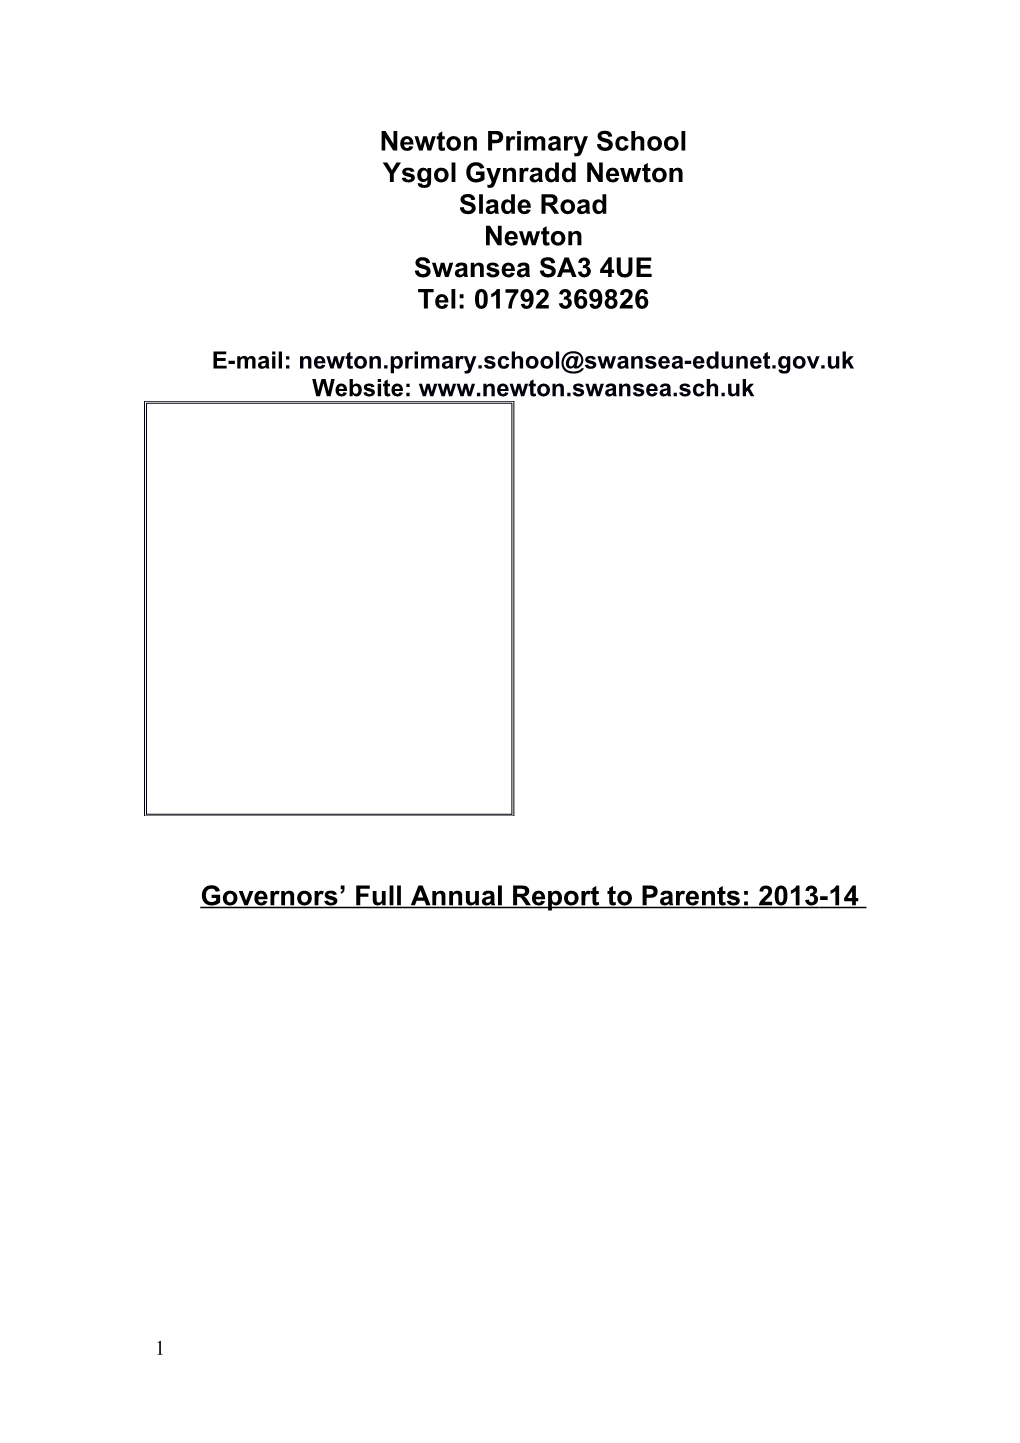 Governing Body Annual Report to Parents